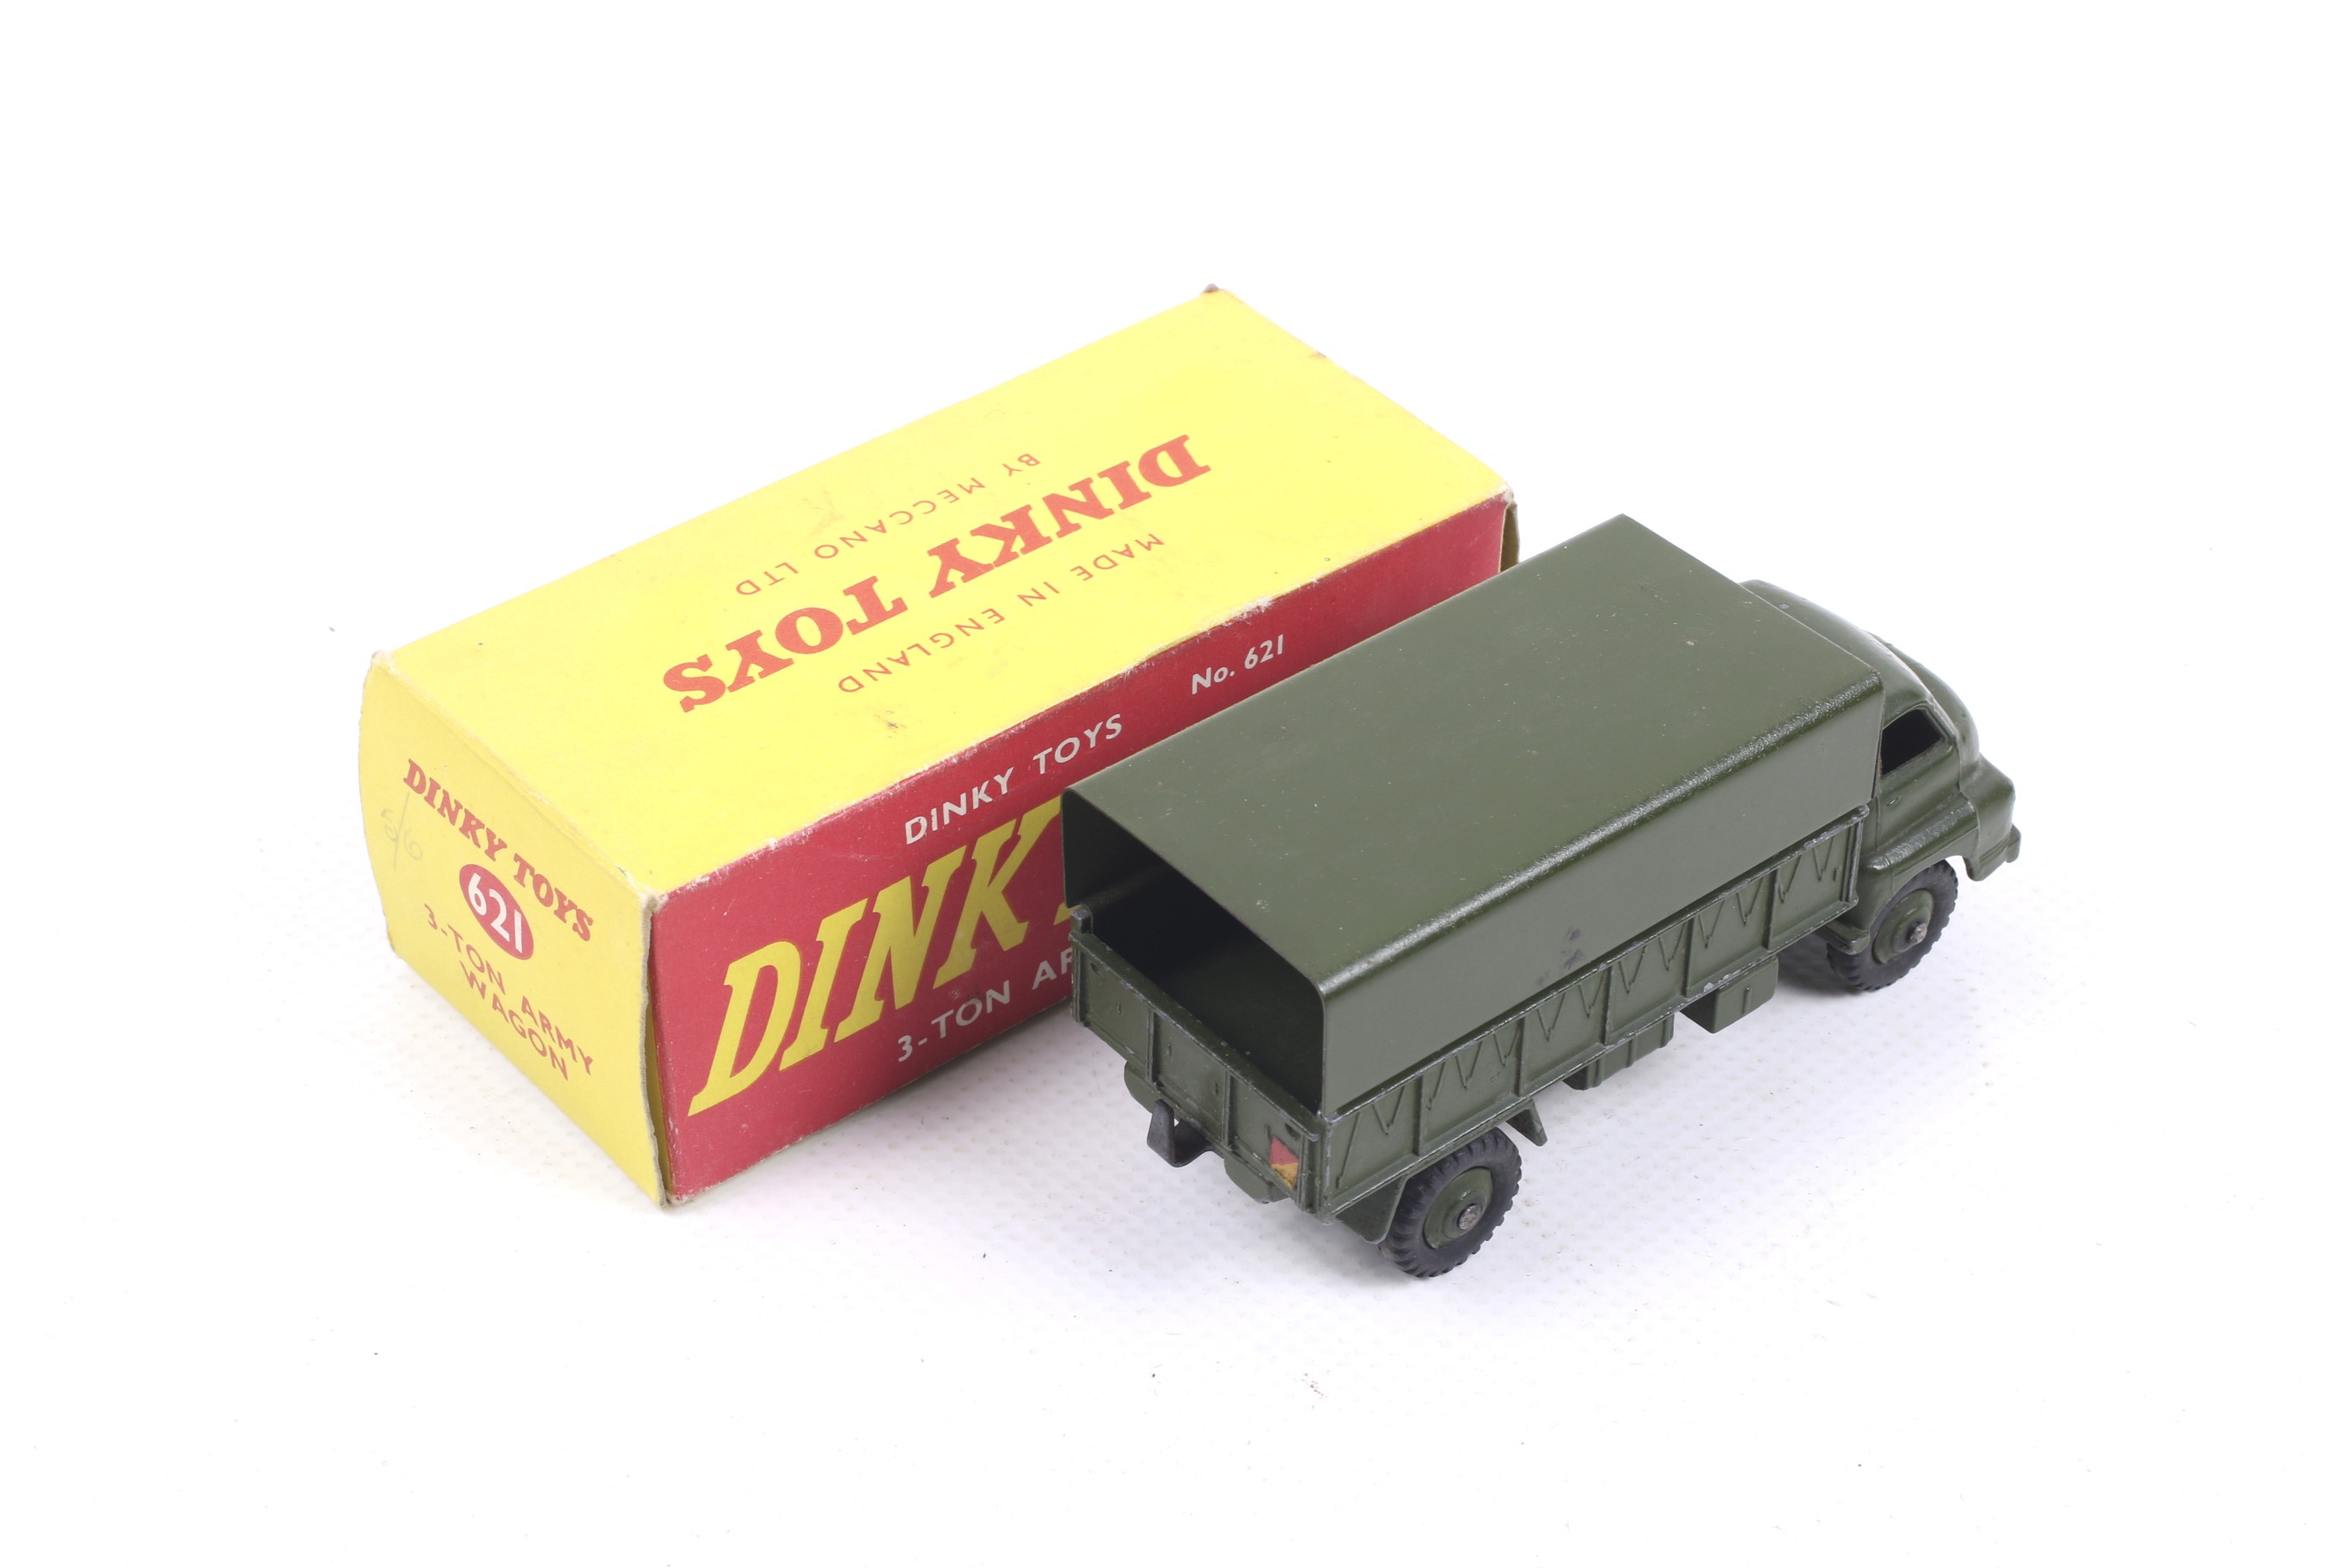 A Dinky diecast 3 ton Army Wagon. No. 621, green body complete with driver, in original box. - Image 2 of 2